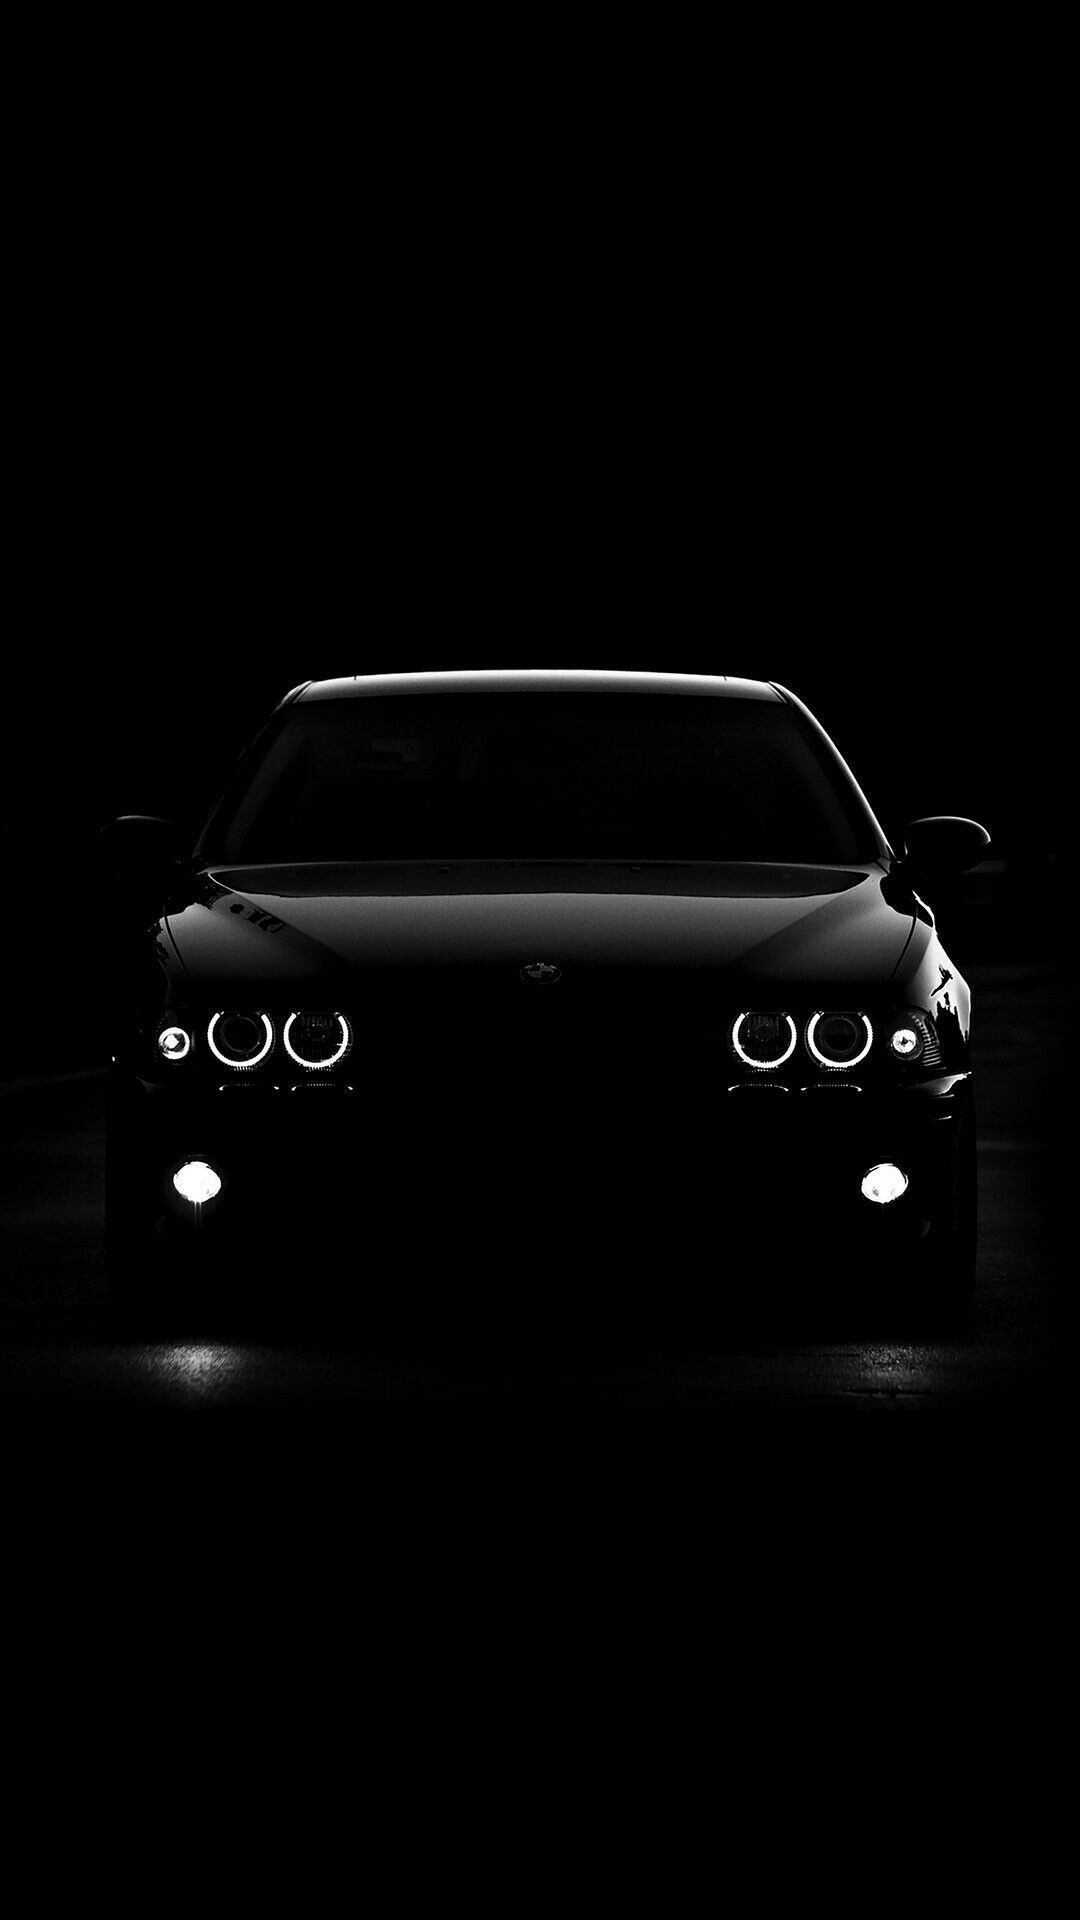 BMW 5 Series, BMW E39, Blacked out, Cars, 1080x1920 Full HD Phone